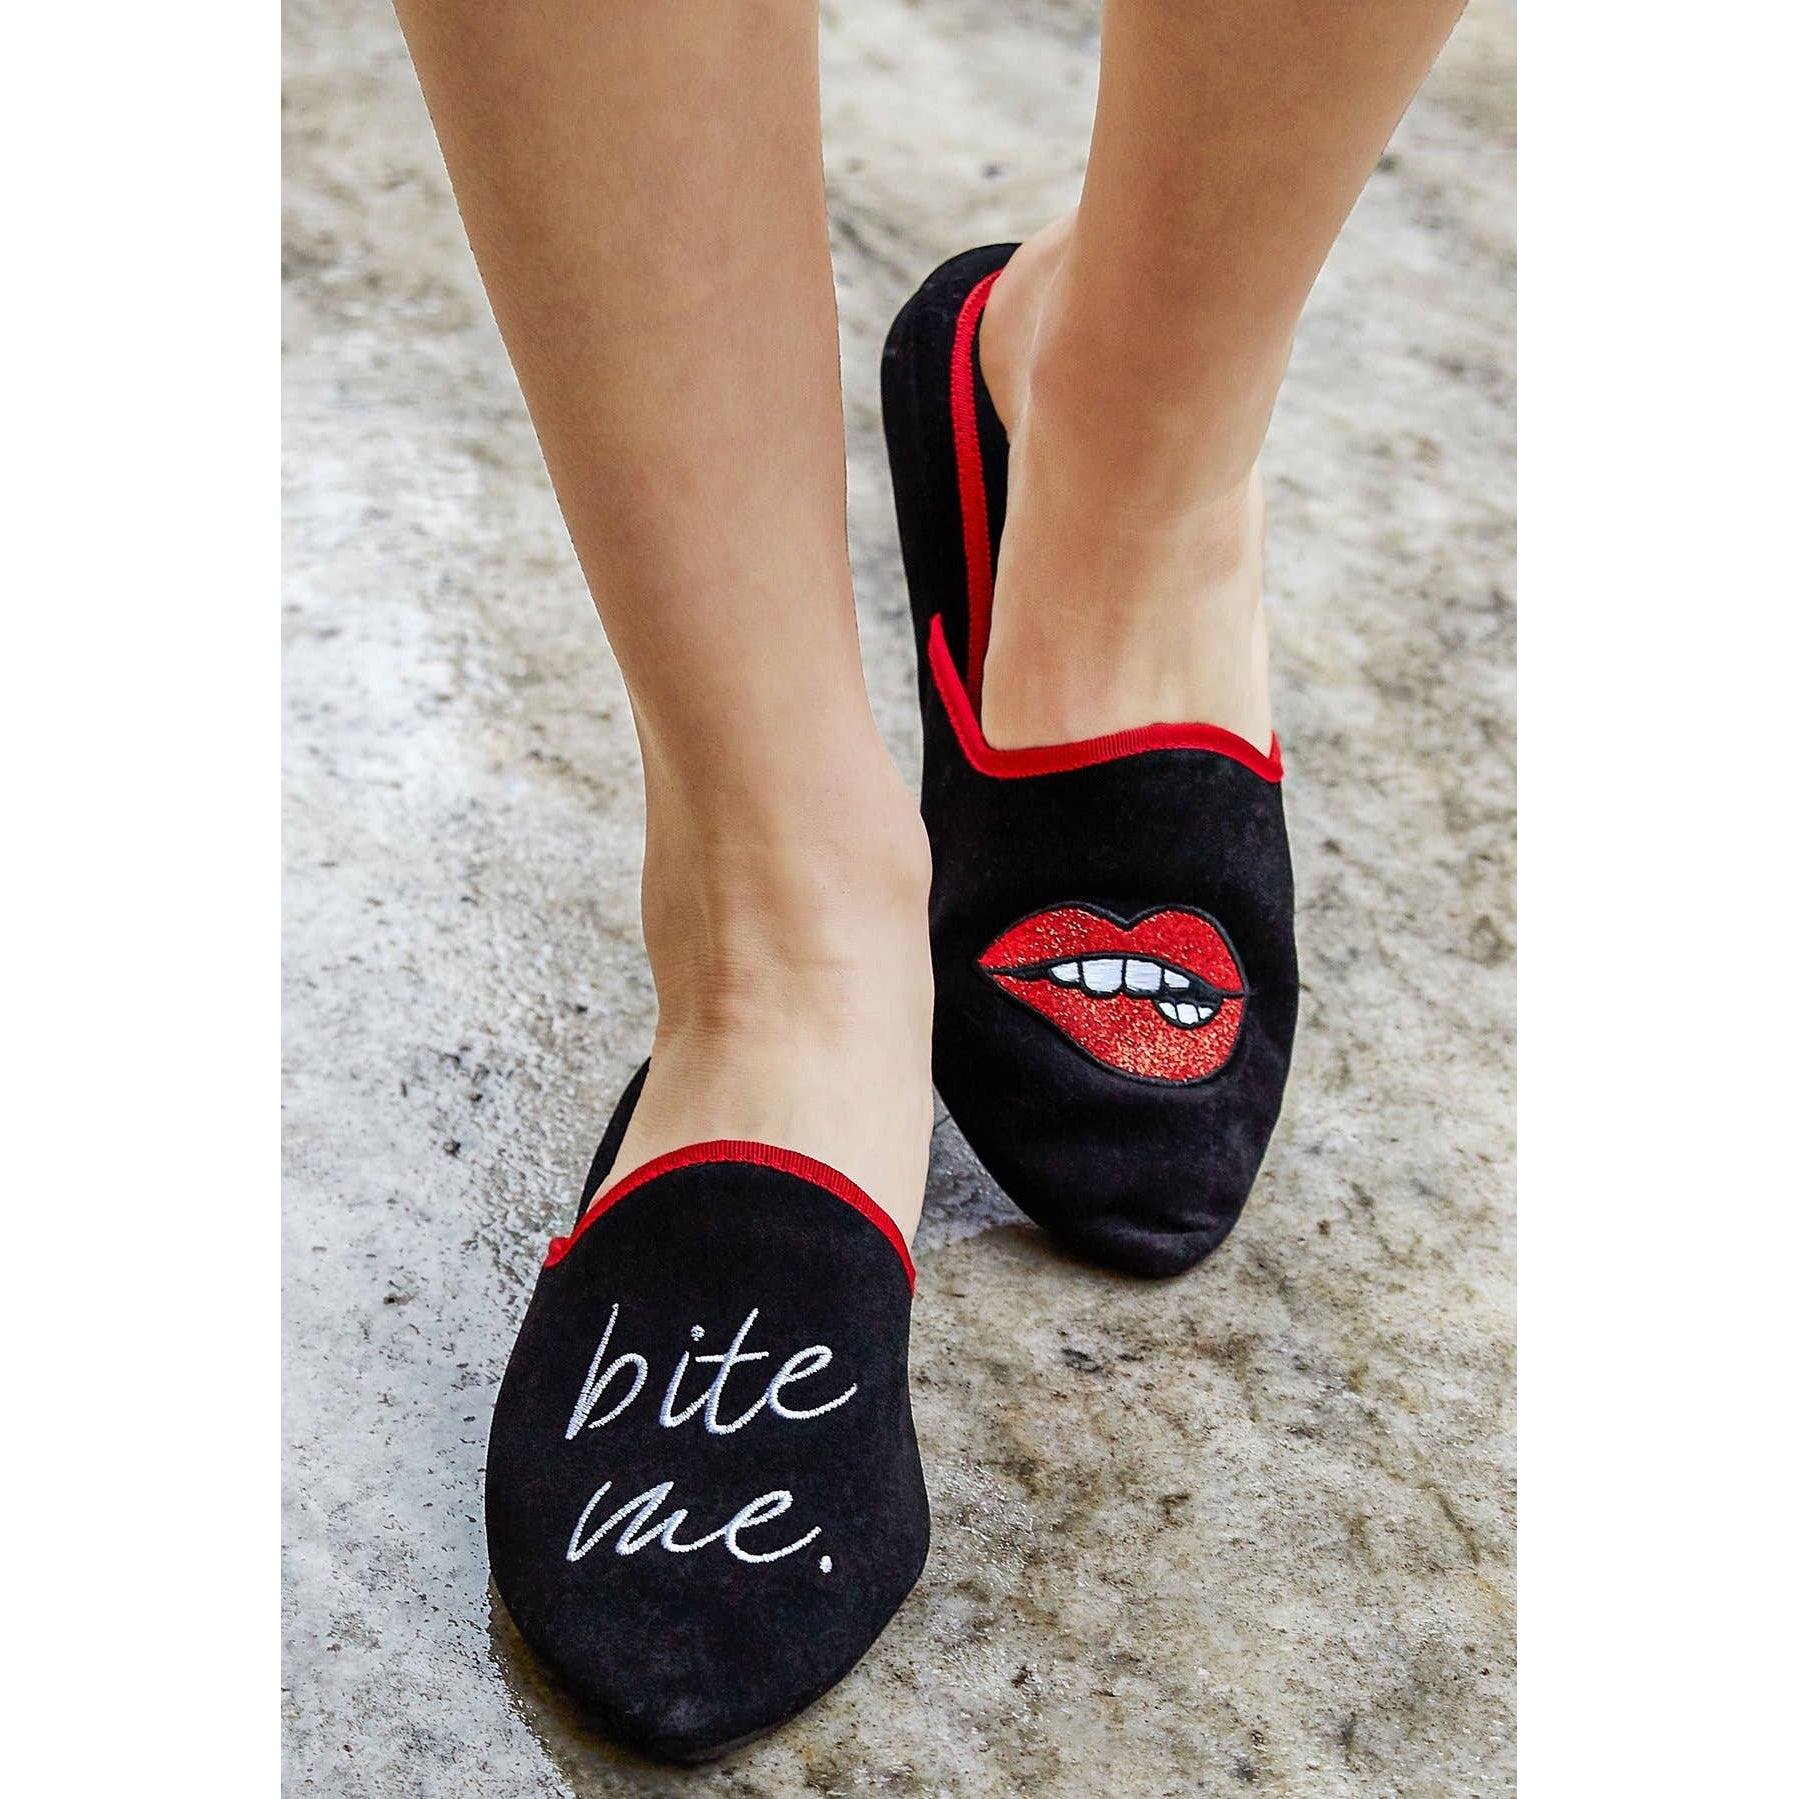 [SIZE SMALL ONLY REMAINING] Bite Me Embroidered Lounge Slippers in Black and Red with Lips Design | House Shoes | Sexy Lady Slip-On Indoor Slides